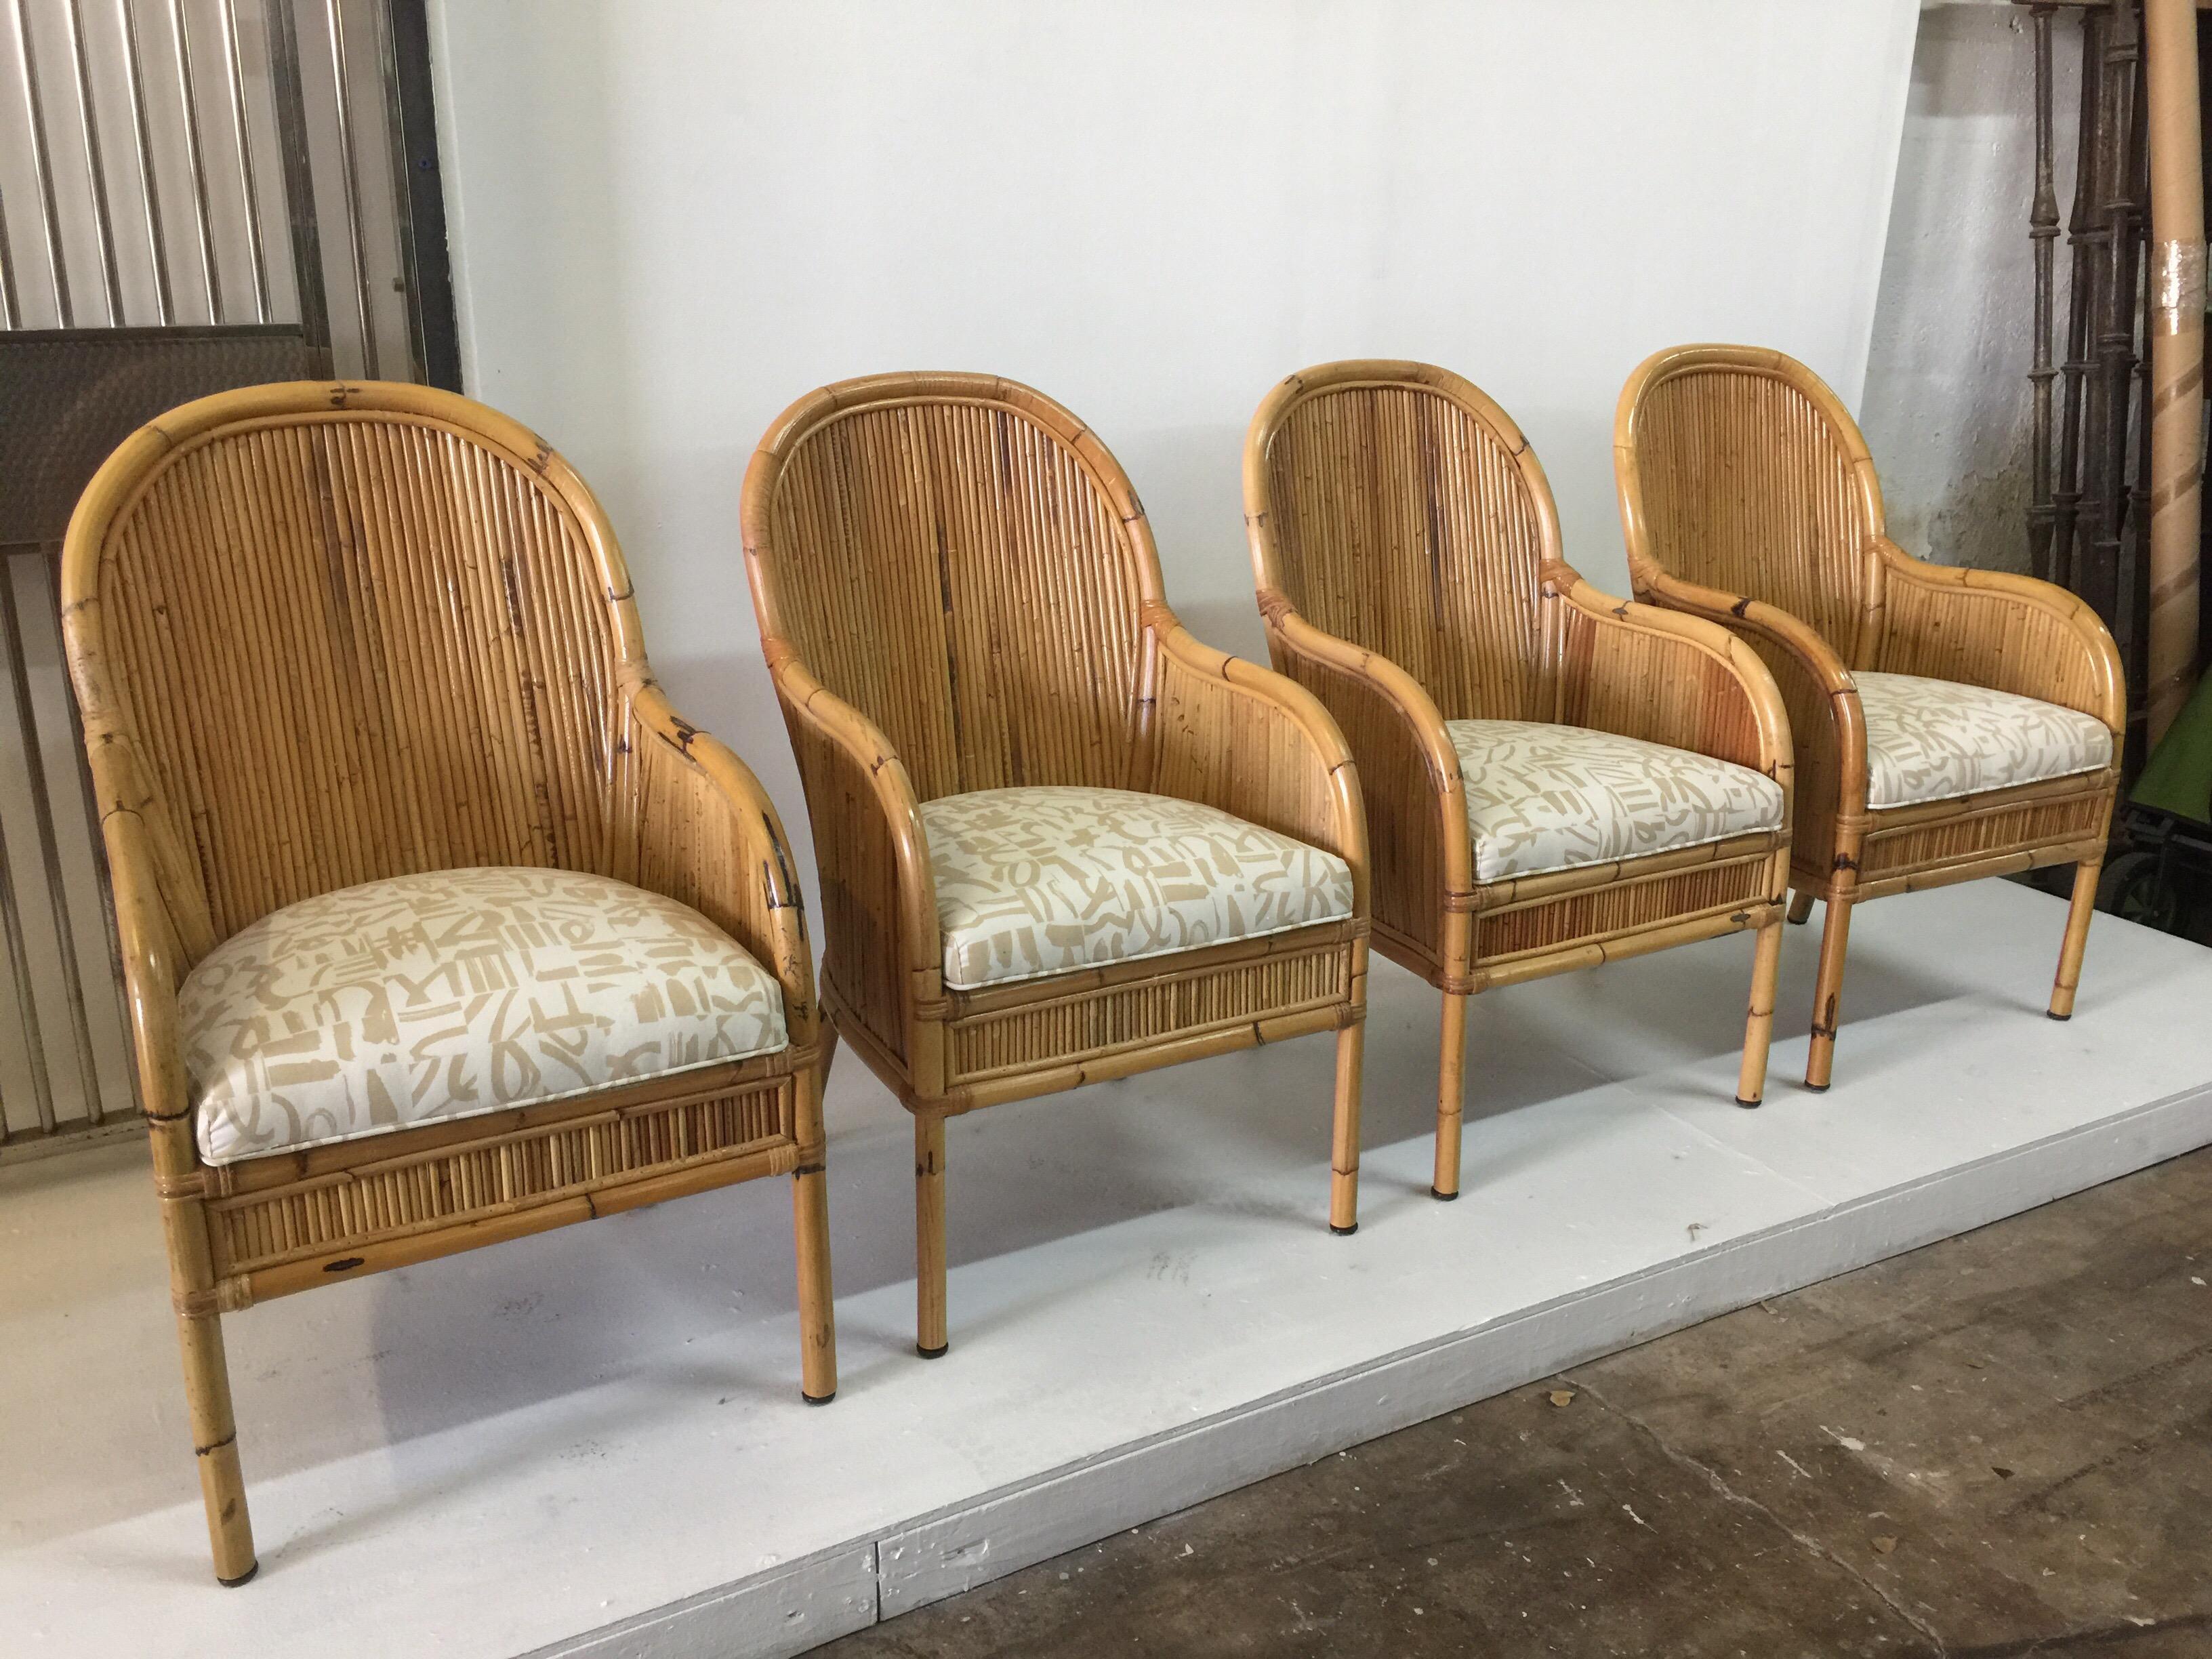 Vintage Henry Olko Set of 4 Bamboo Chairs For Sale 6